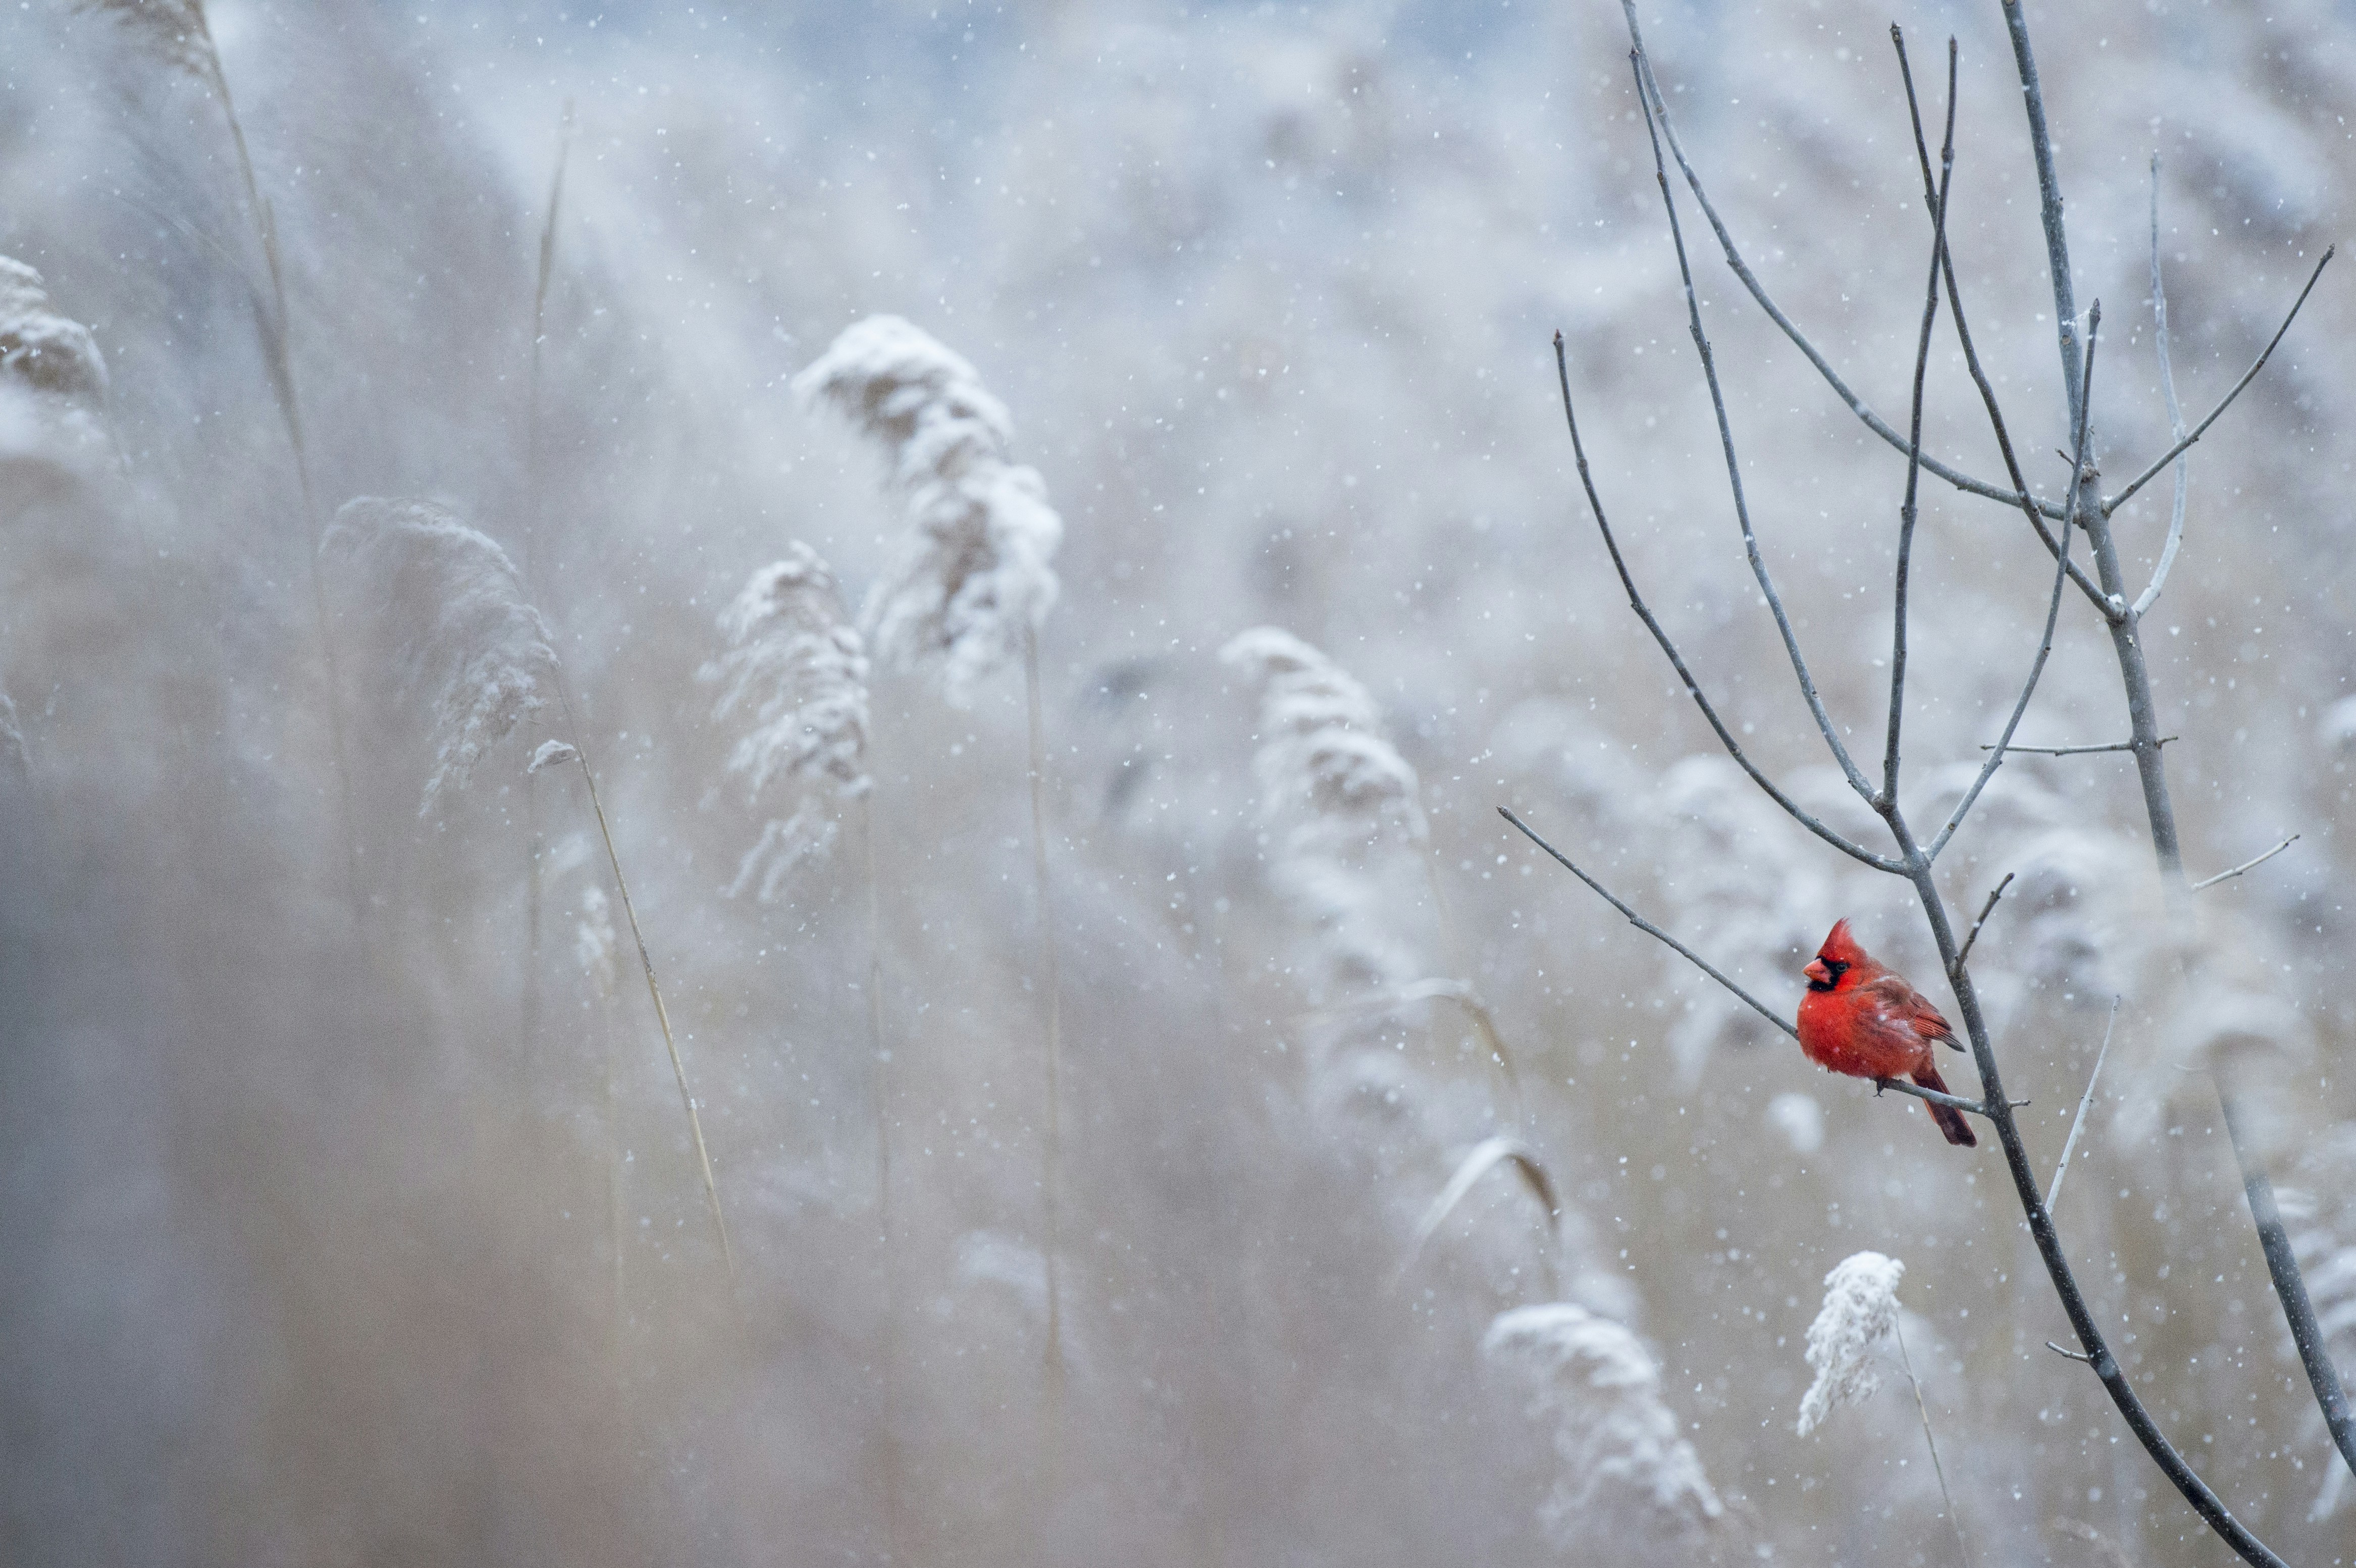 A bright red male Northern Cardinal sits perched on a branch in the falling snow.